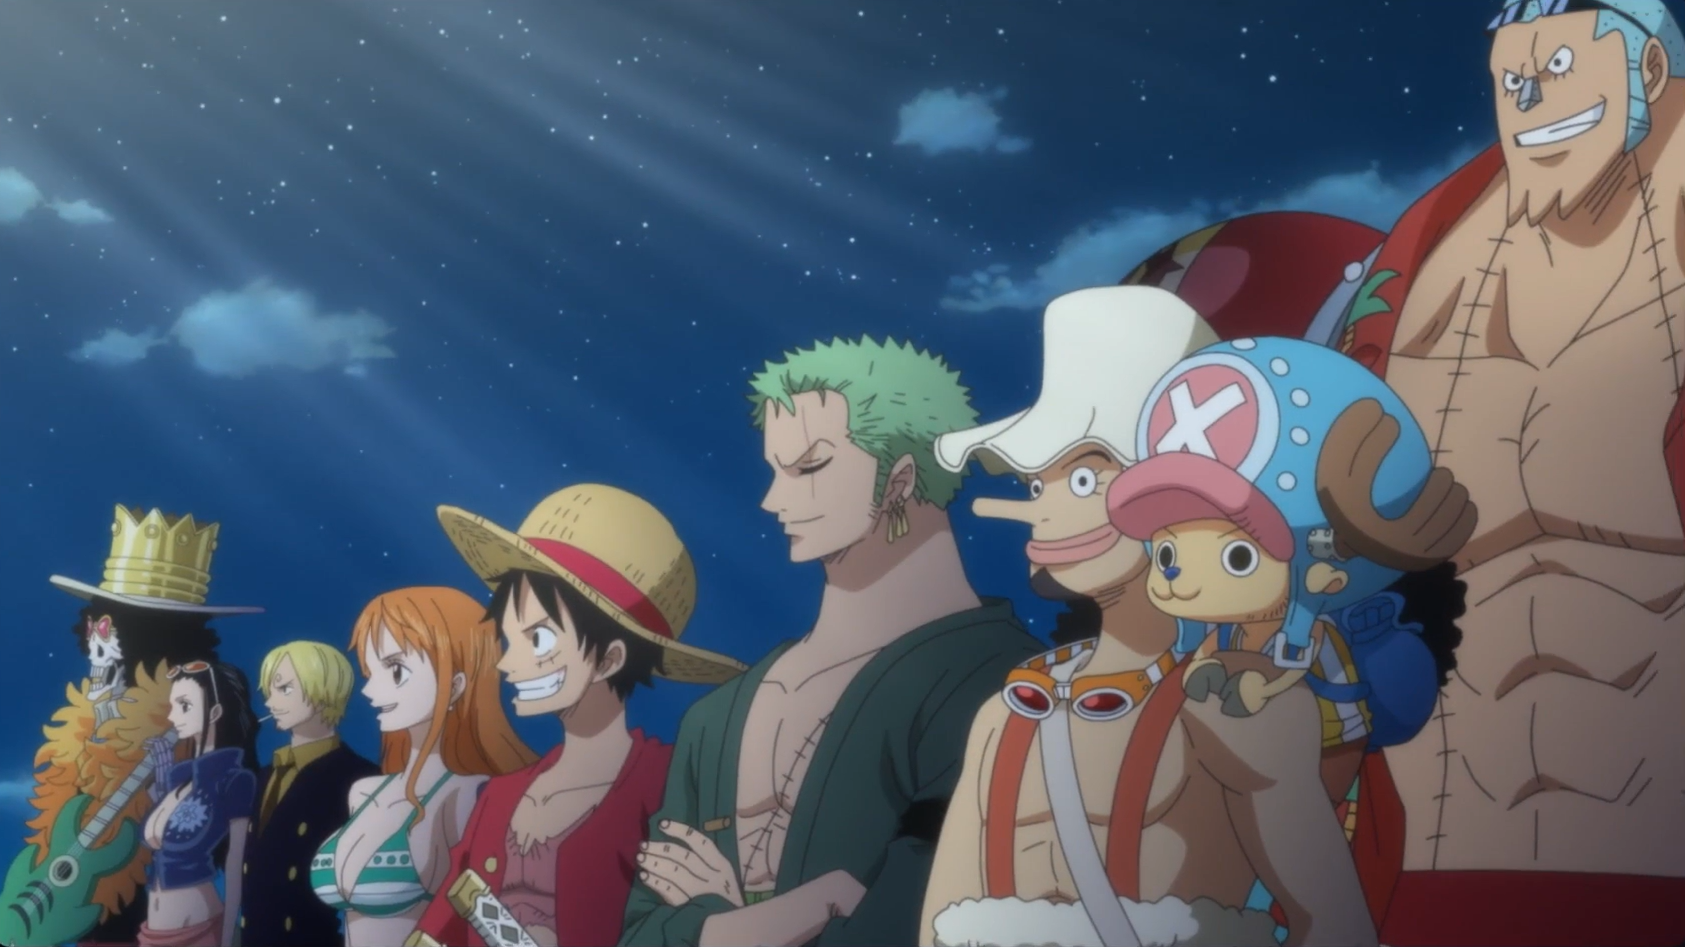 Toei Animation - Hello Straw Hats! To celebrate the